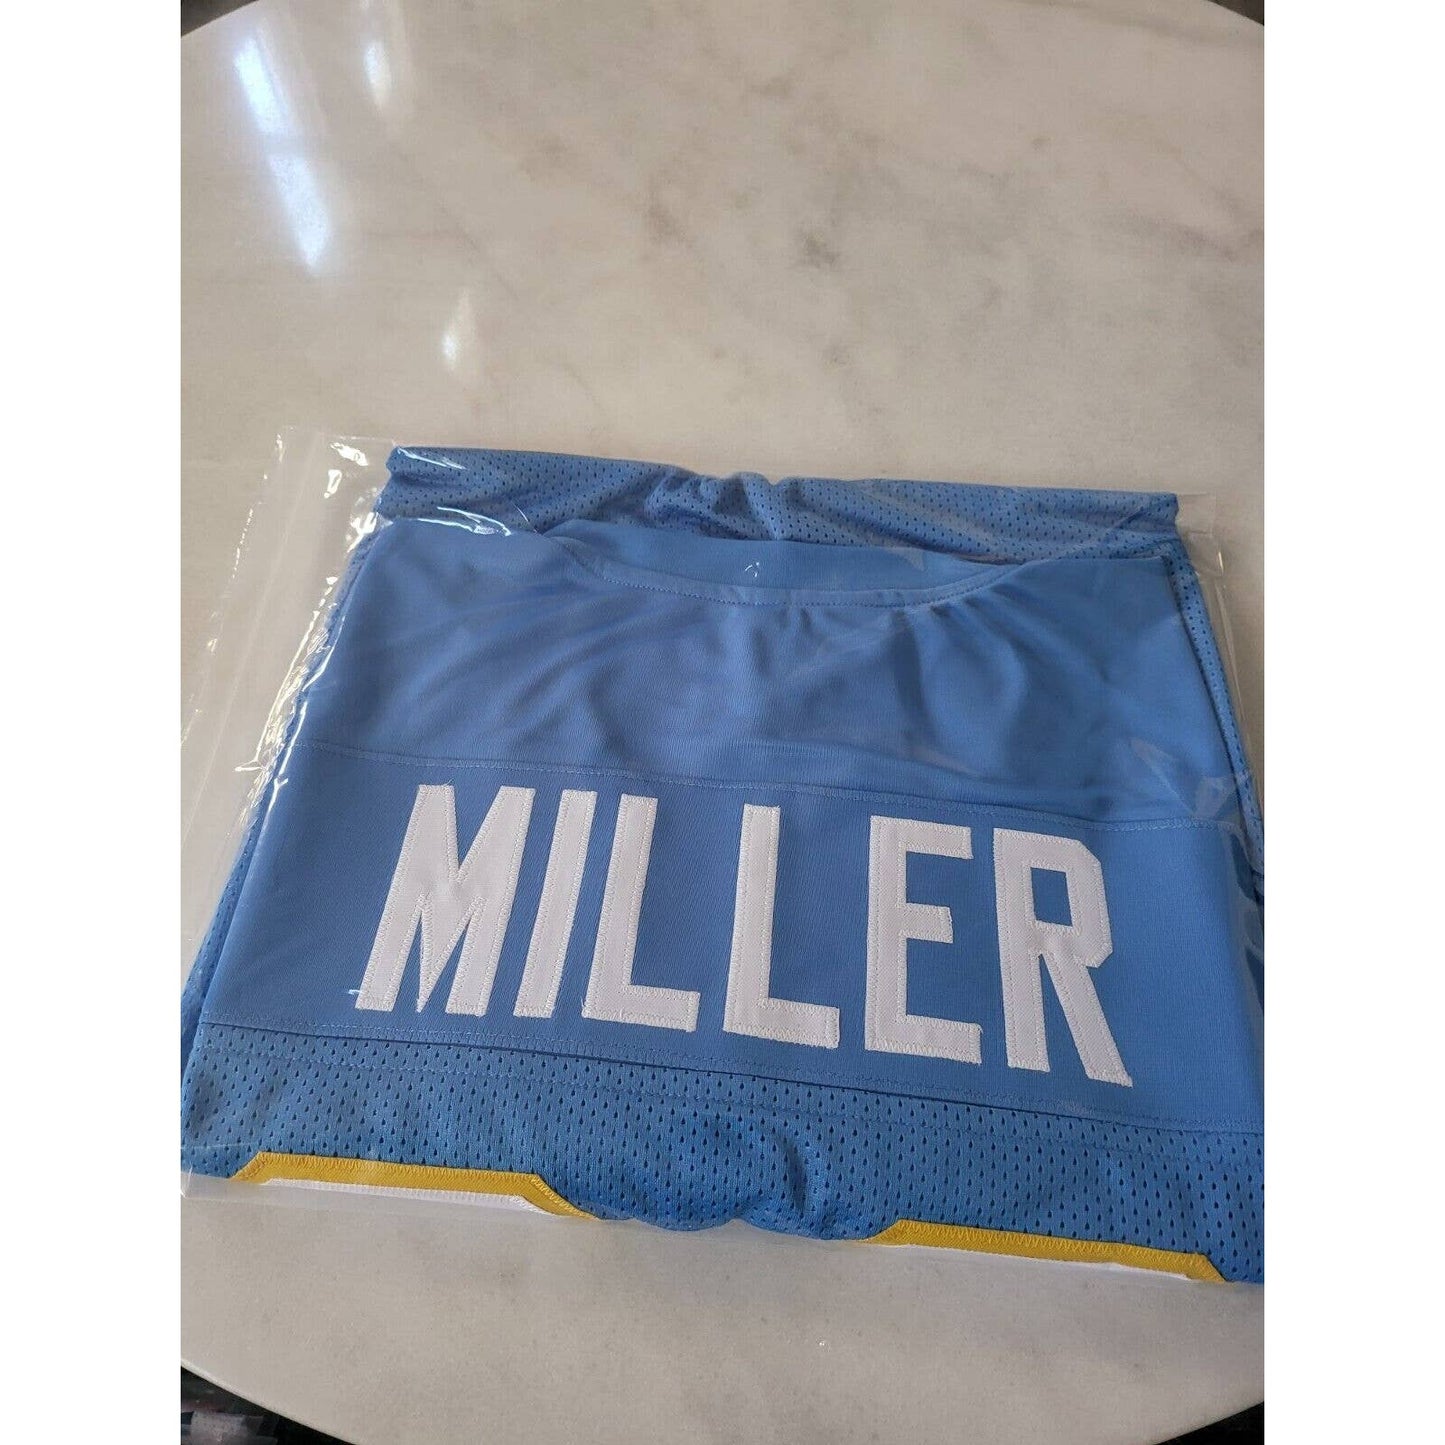 Anthony Miller Autographed/Signed Jersey JSA Stick San Diego Chargers Pro Bowler - TreasuresEvolved